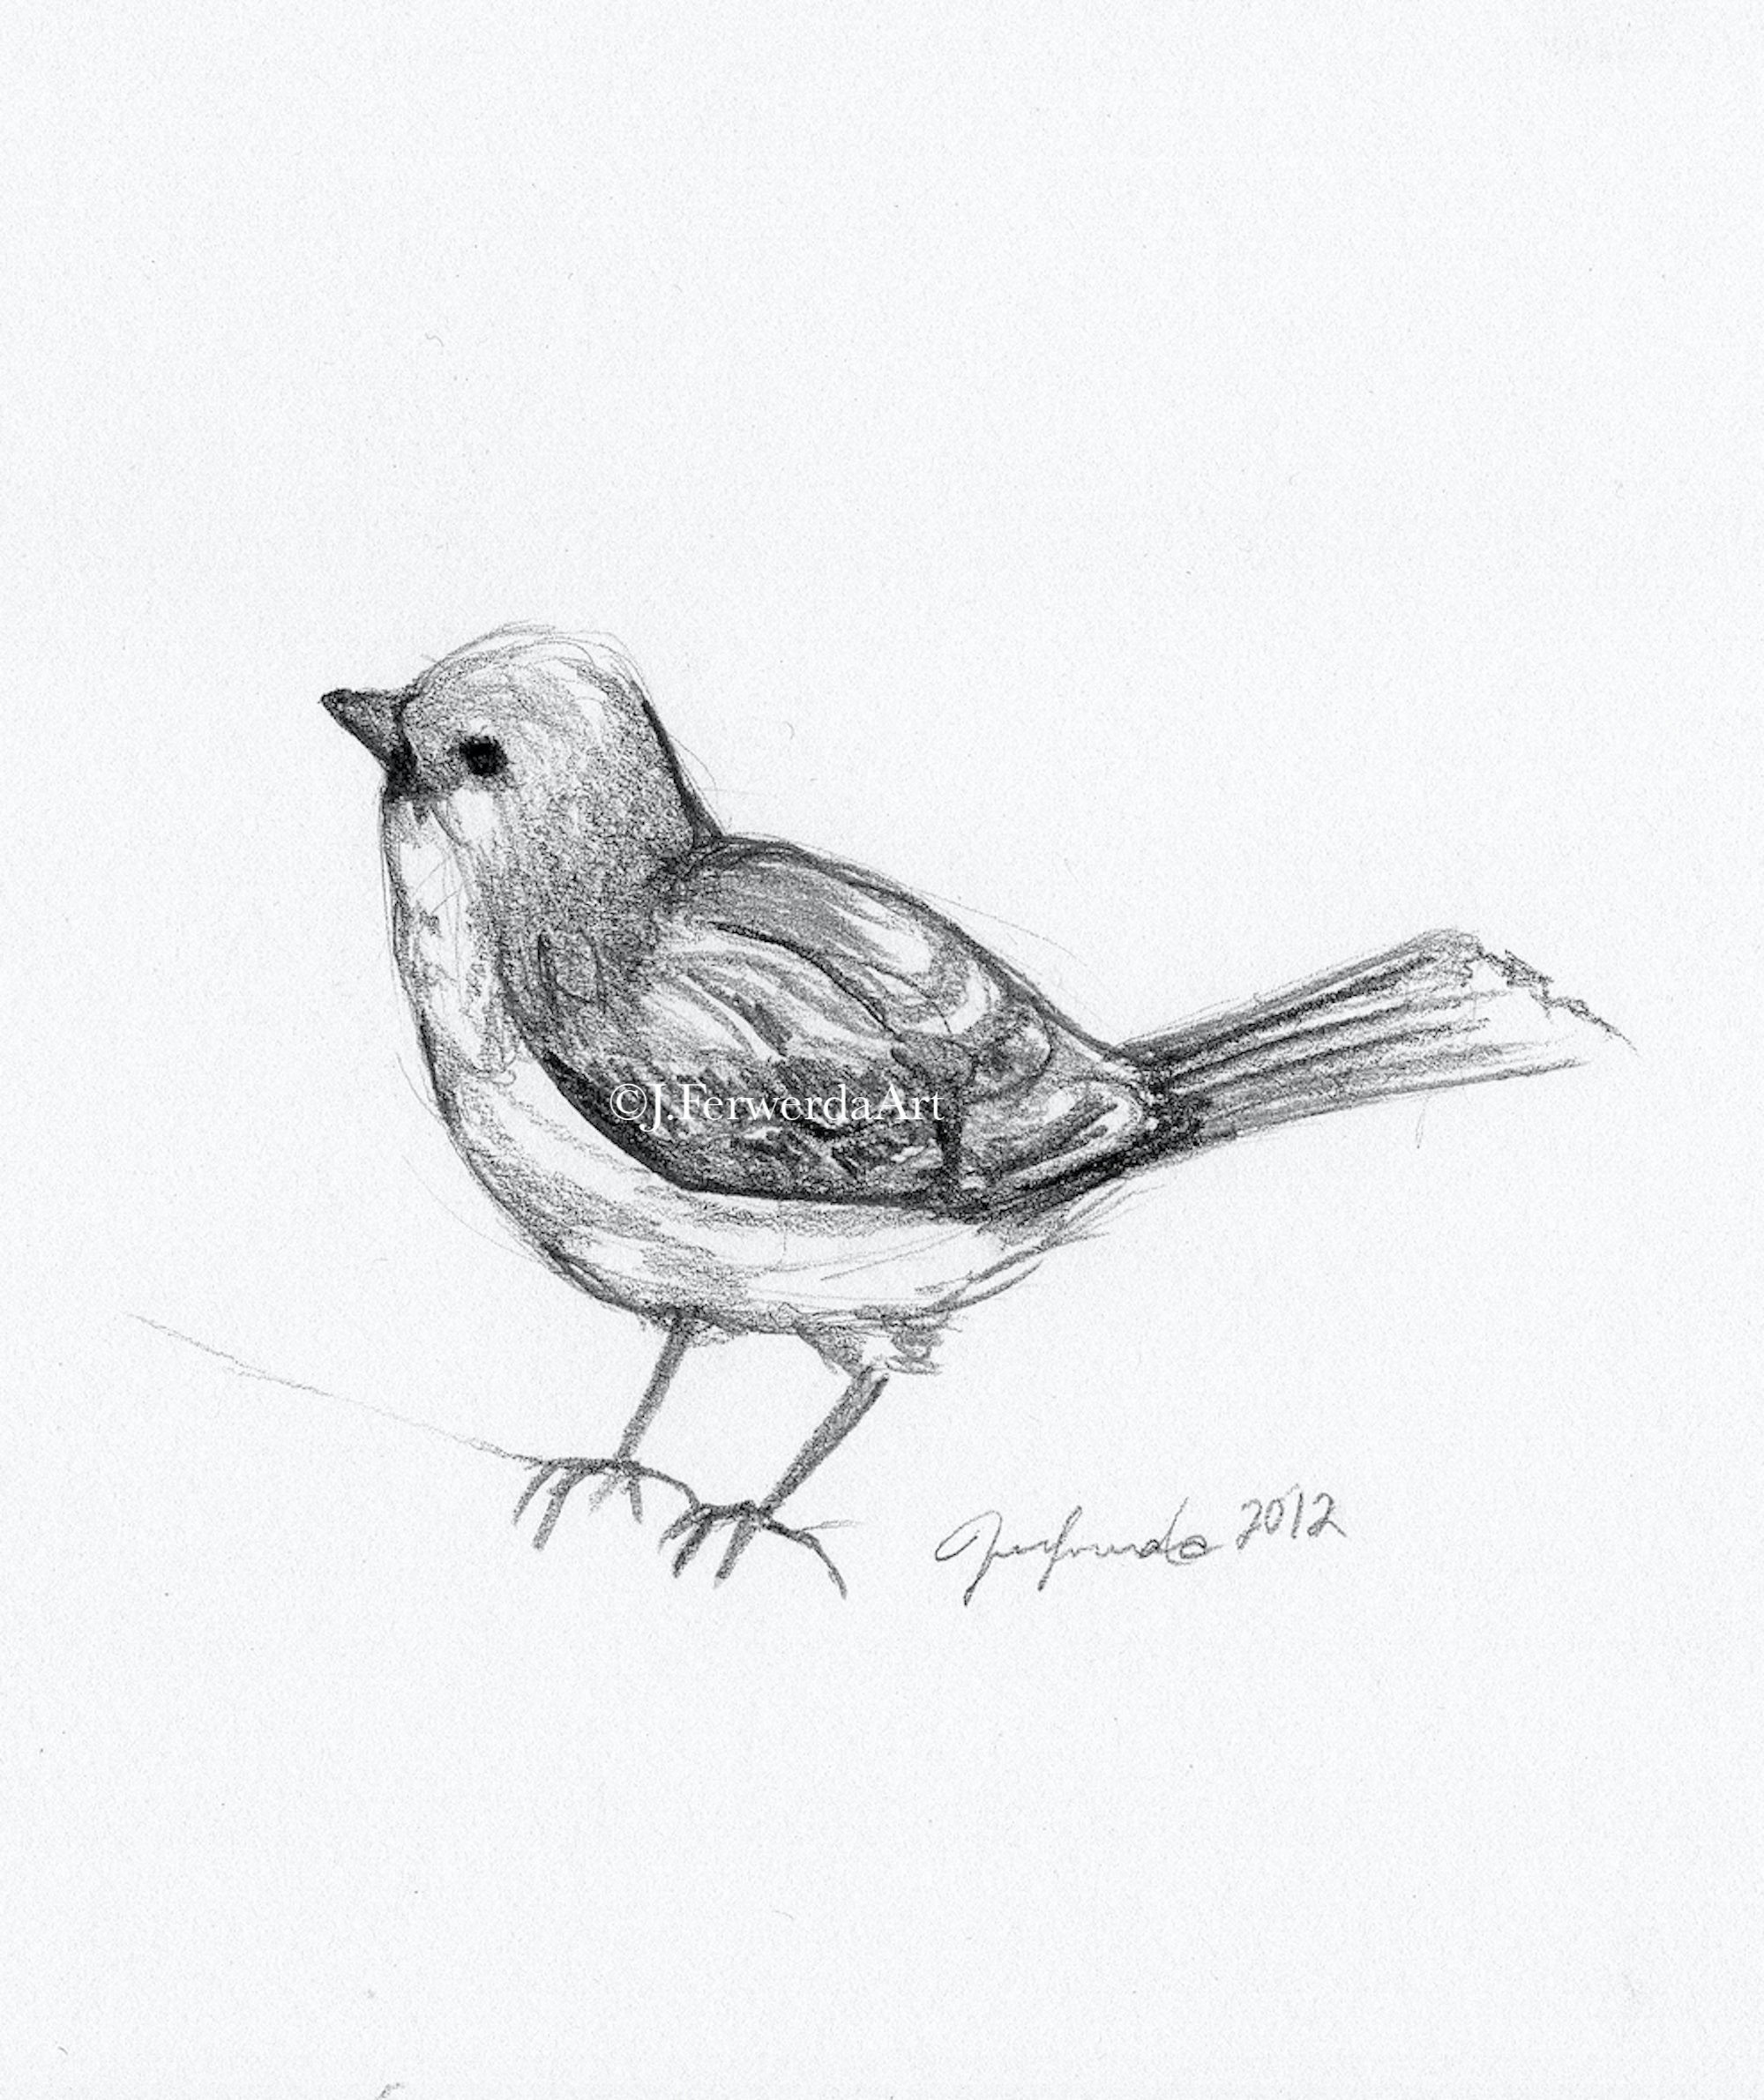 Buy Answering Bird Day 3 Pencil Drawing Print Online in India - Etsy